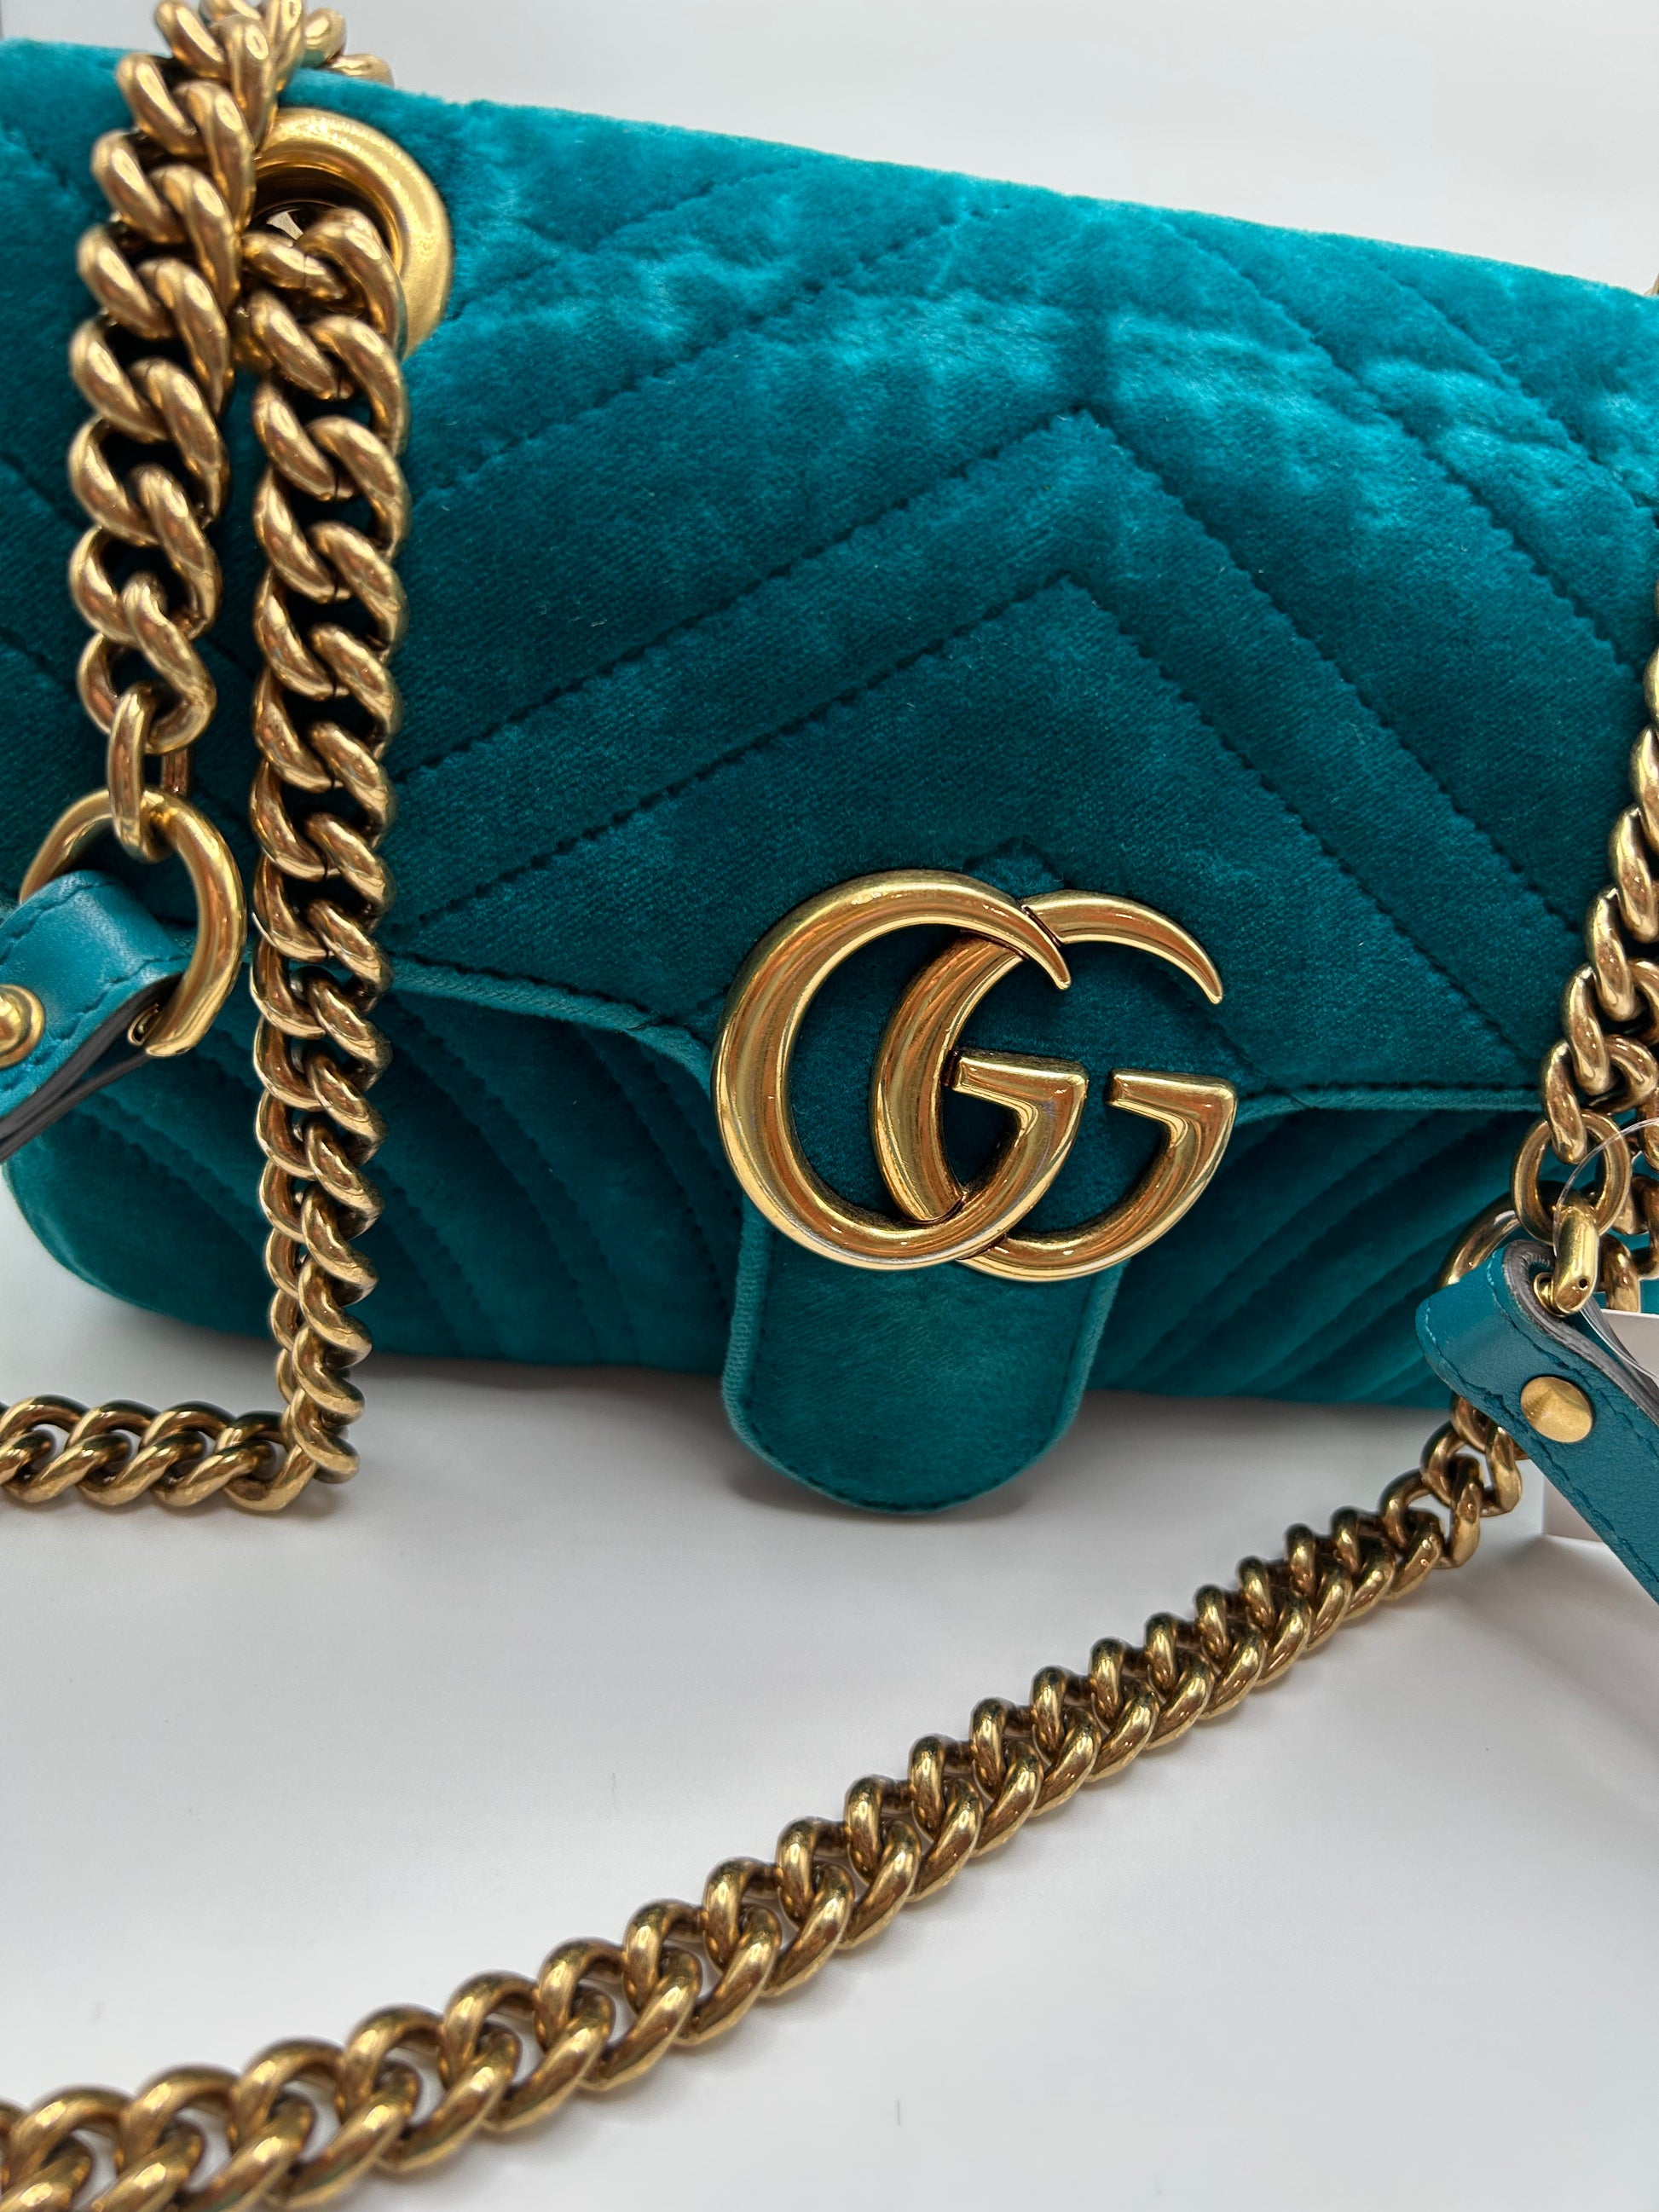 Gucci Marmont Velvet Turquoise Mini – Preloved Luxe